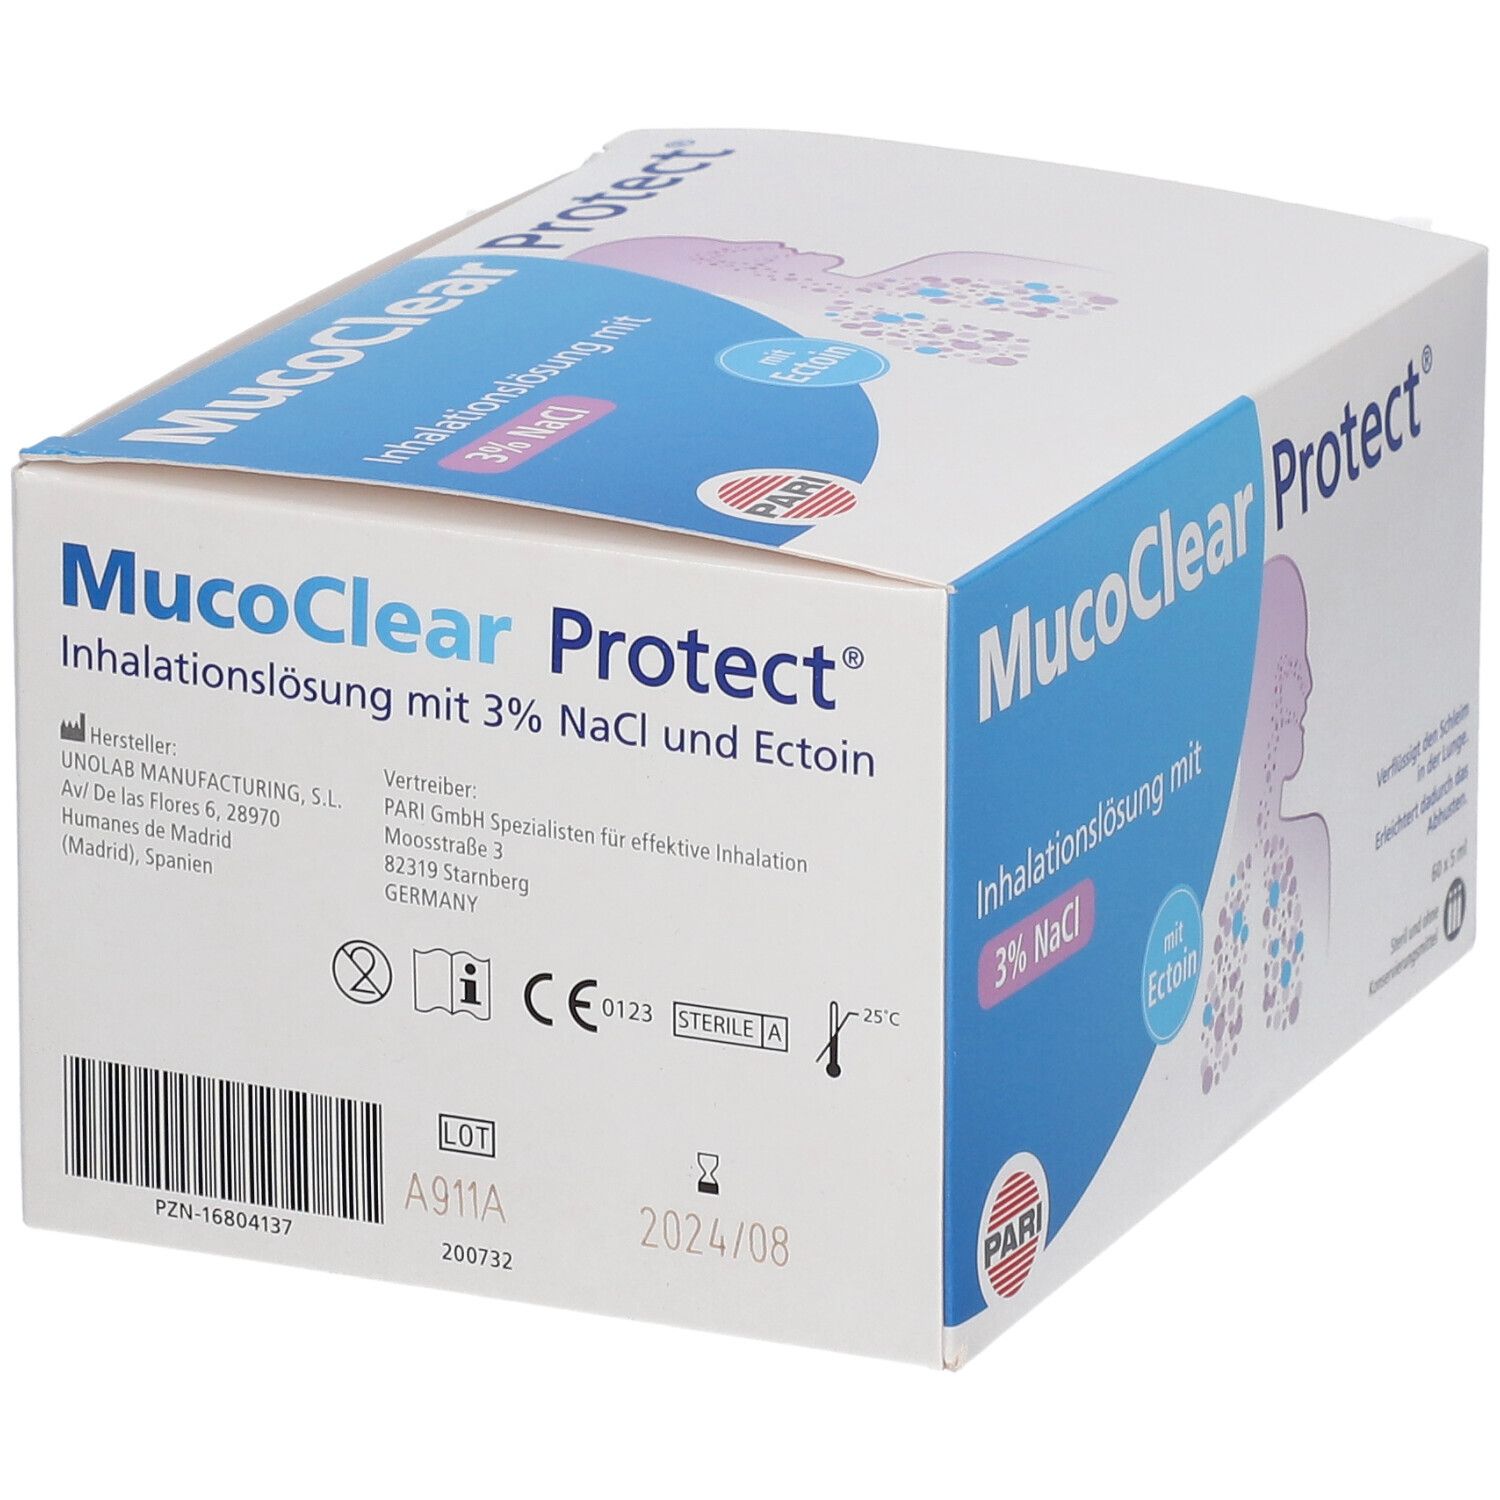 MucoClear Protect Hypertone Salzlösung (3% NaCl) mit Ectoin®